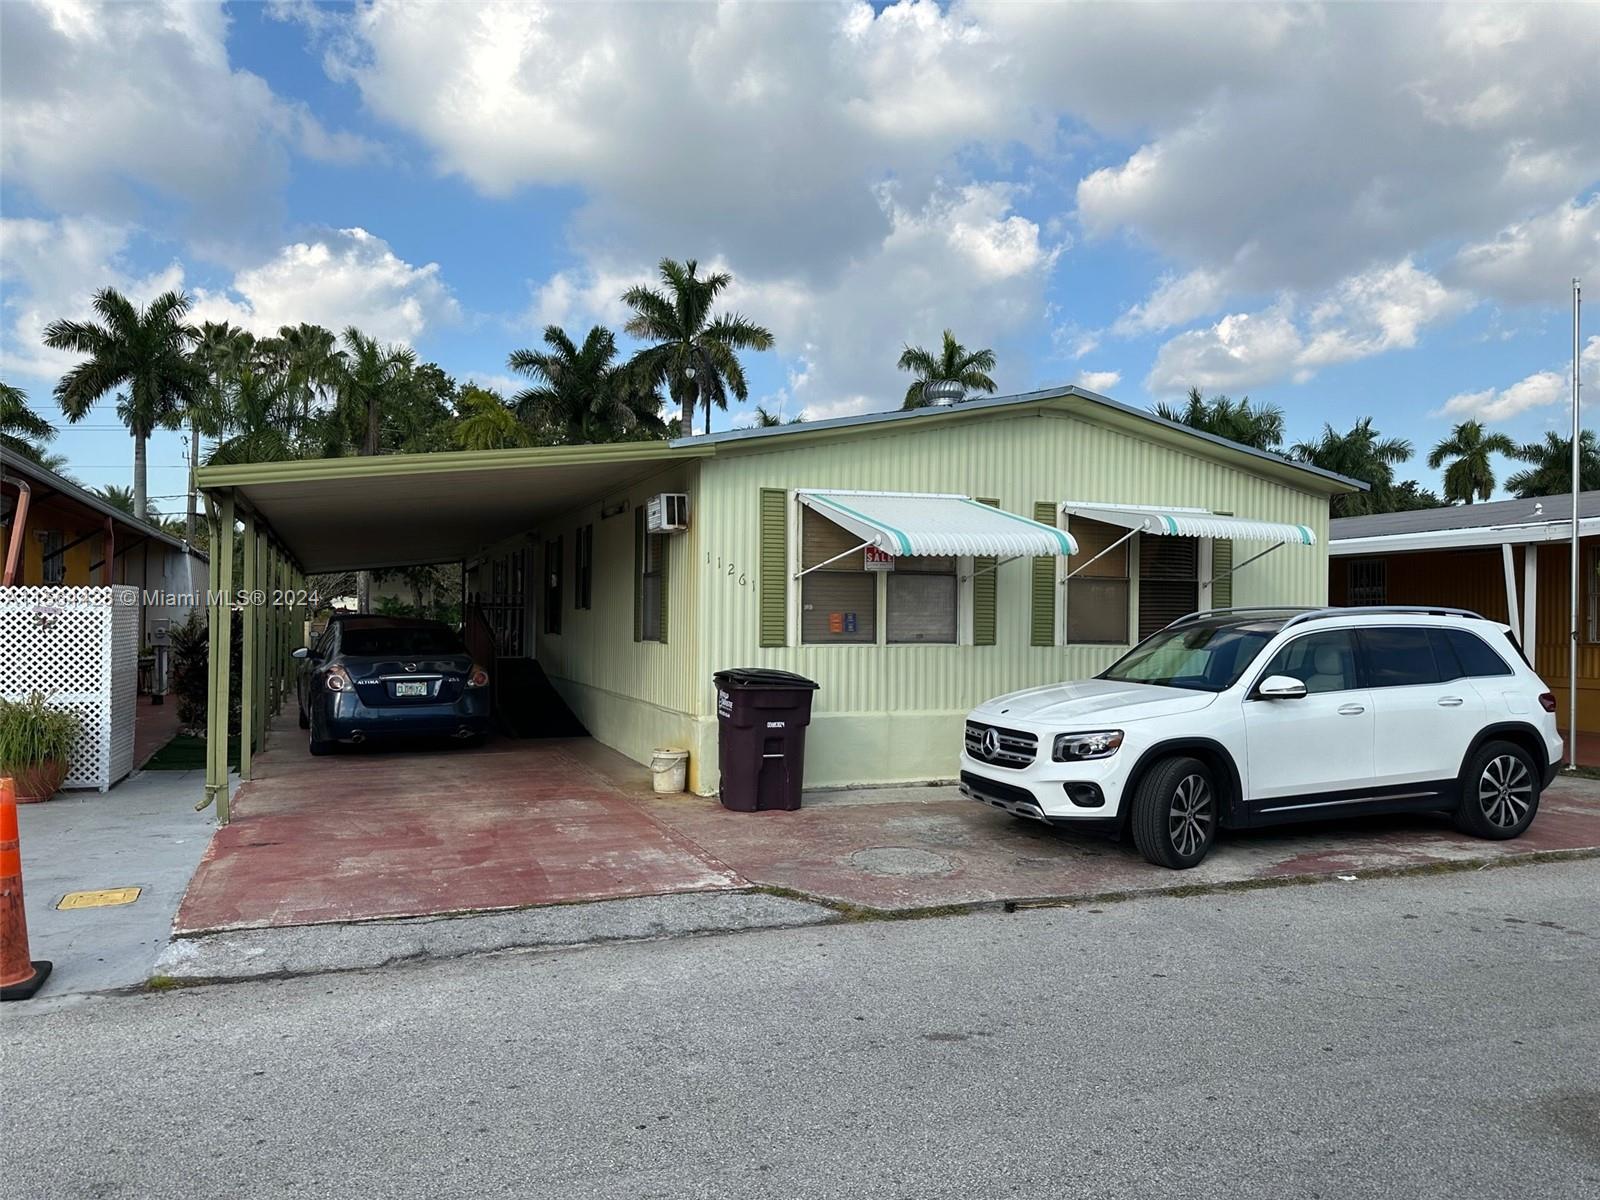 Photo of 11261 NW 6 Ter in Miami, FL